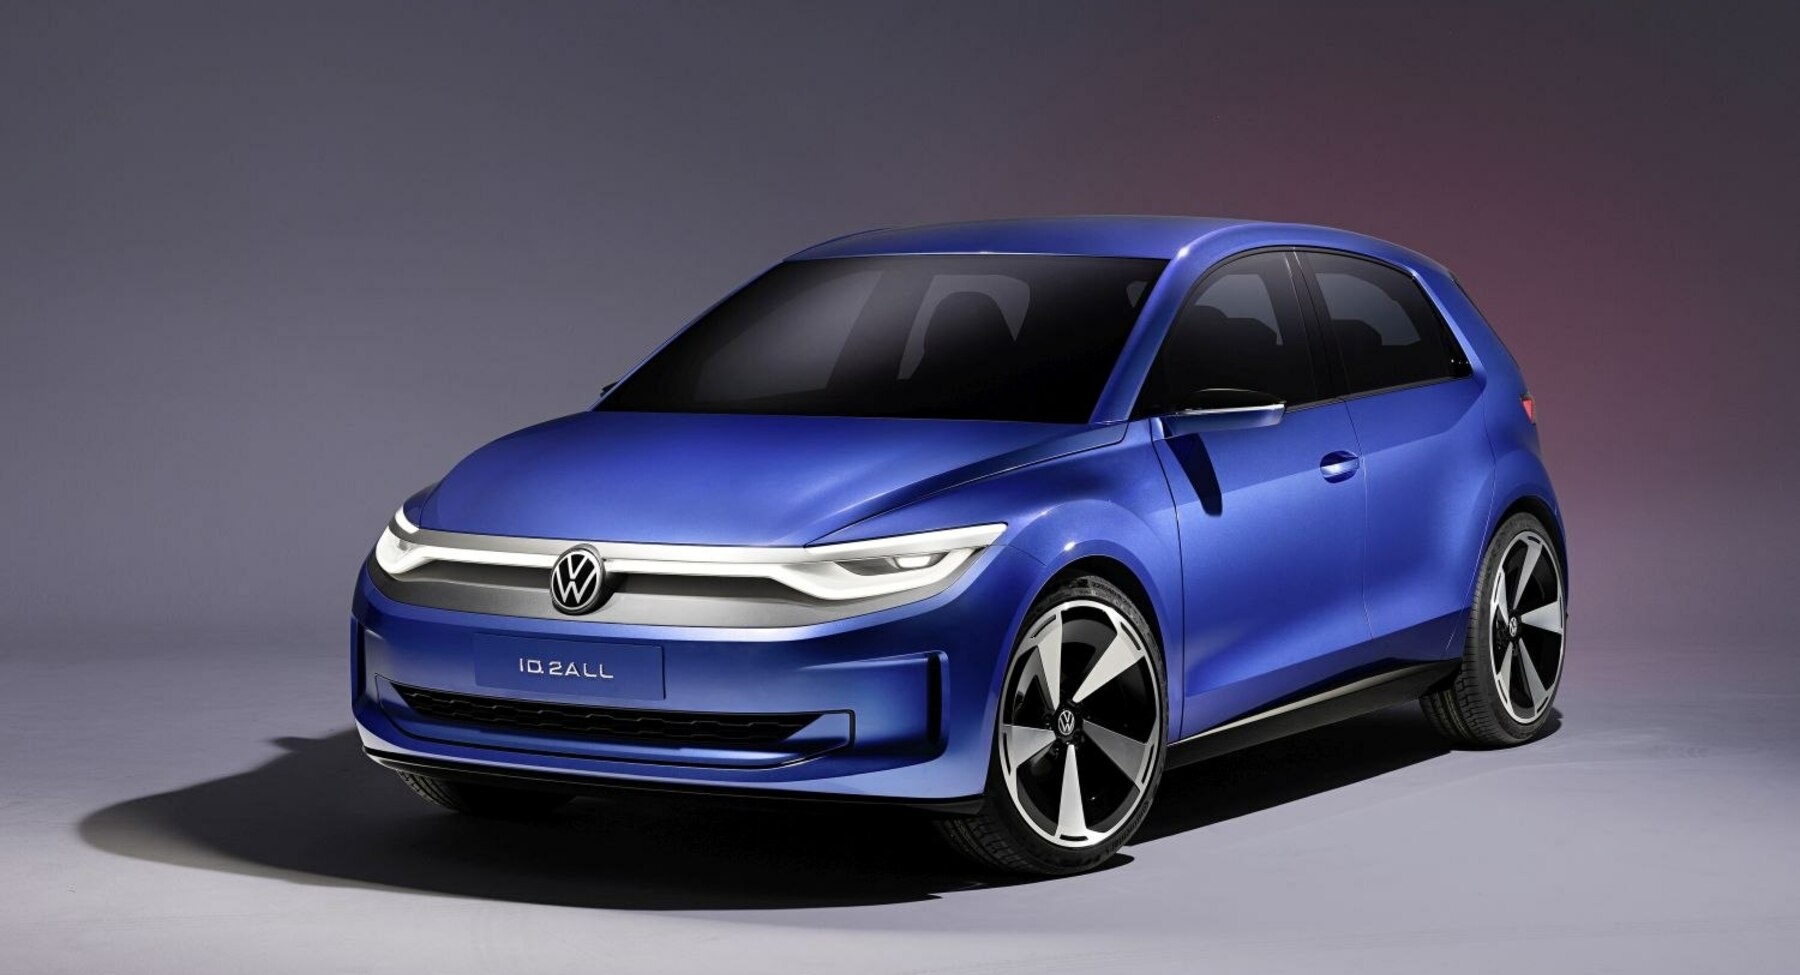 Volkswagen ID. 2all (Concept car) (226 Hp) Electric